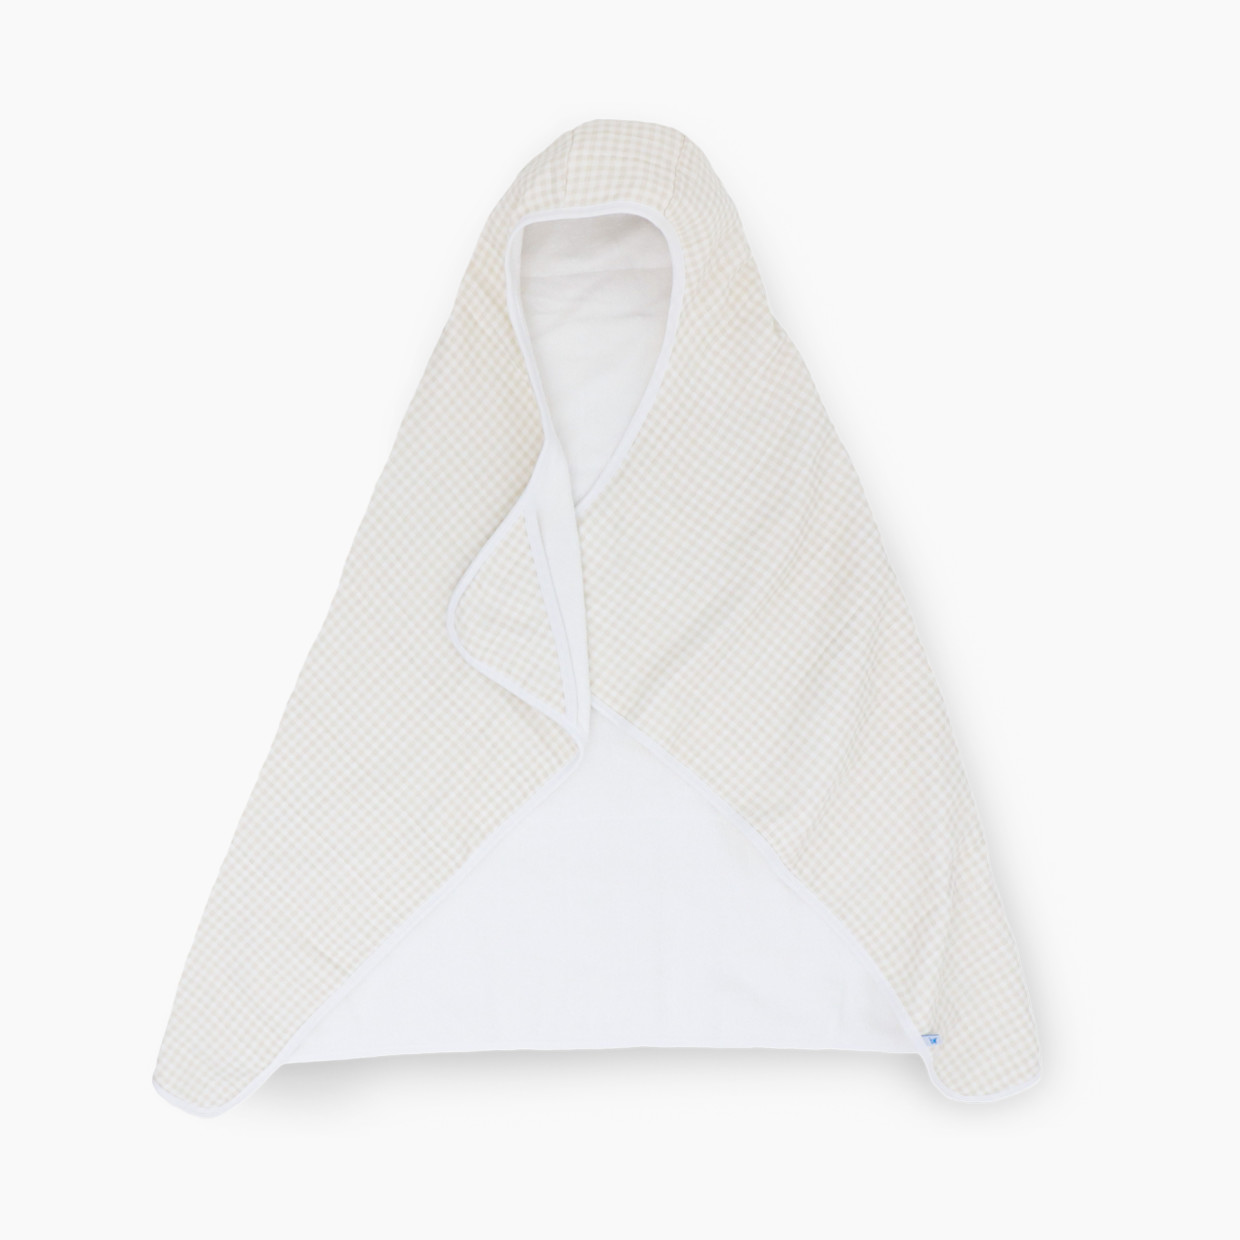 Little Unicorn Cotton Muslin & Terry Toddler Hooded Towel - Tan Gingham.